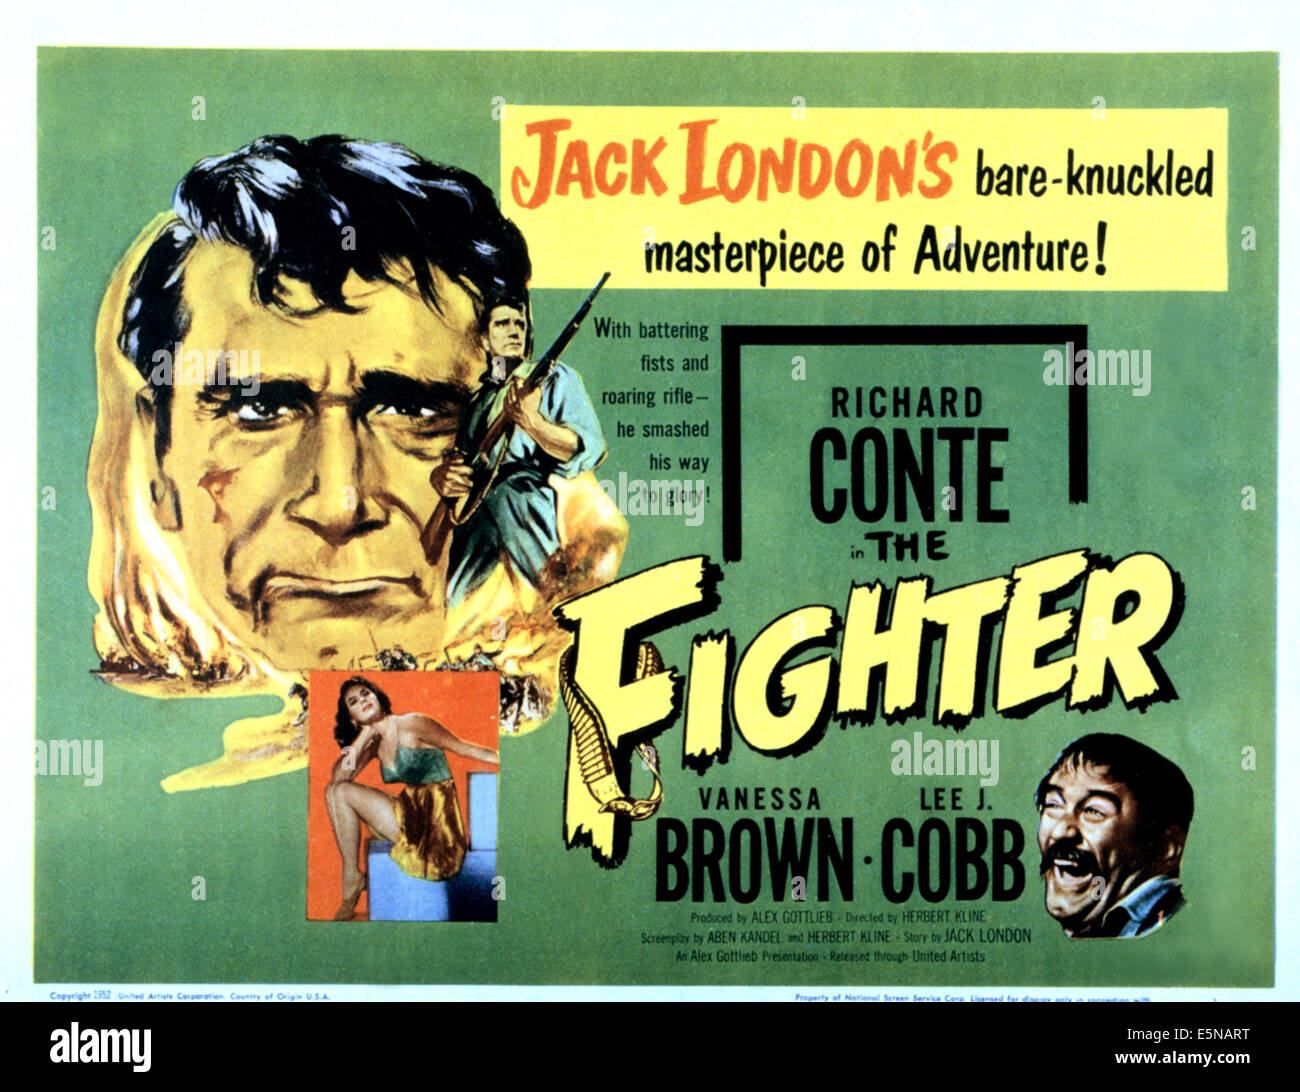 THE FIGHTER, top l-r: Richard Conte, lower left: Vanessa Brown, lower right: Lee J. Cobb on title lobbycard, 1952. Stock Photo